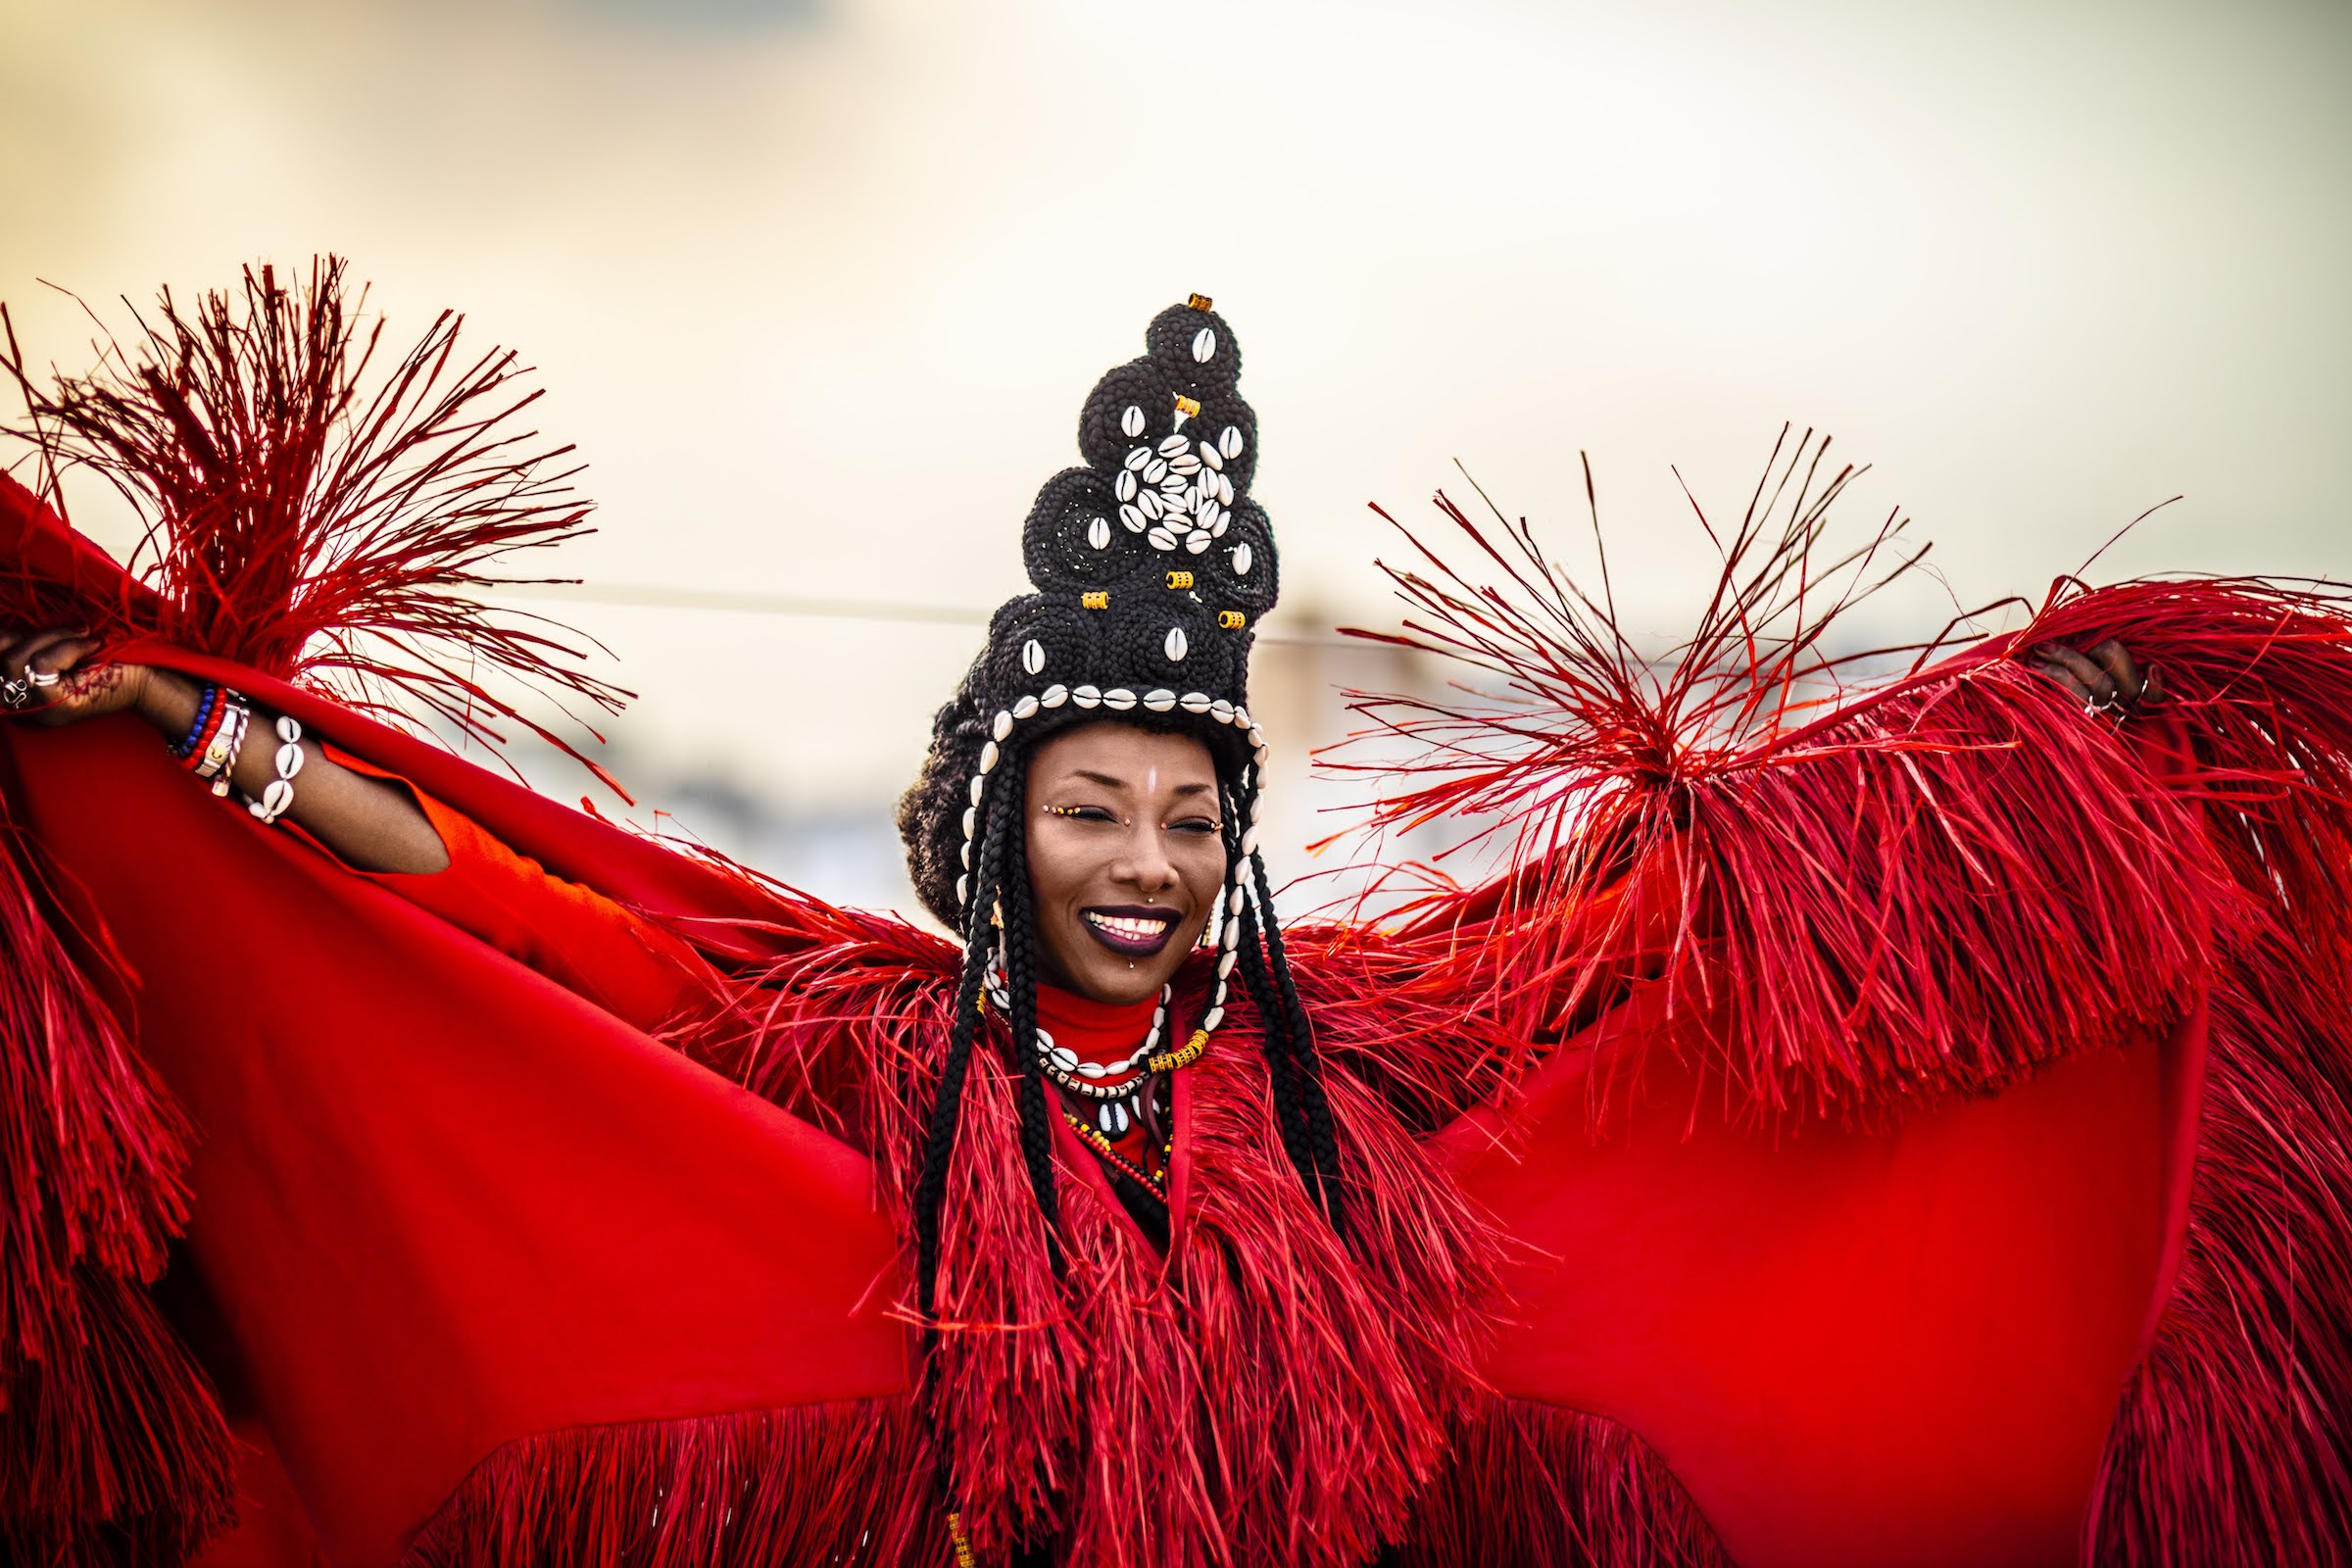 Fatoumata Diawara in a red dress and headpiece made of shells, smiling with her arms outstretched. Photo by Alun Be.